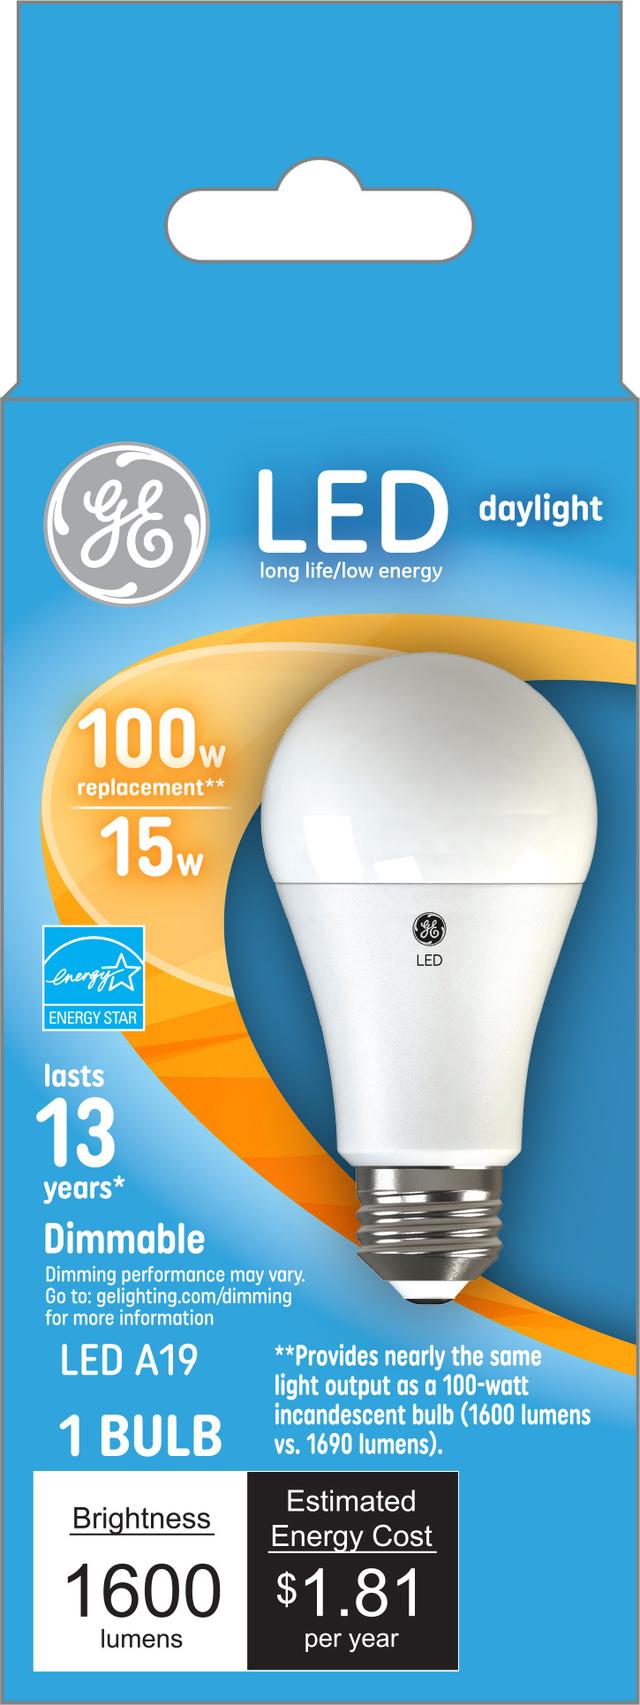 GE Classic LED 100 Watt Replacement, Daylight, A19+ General